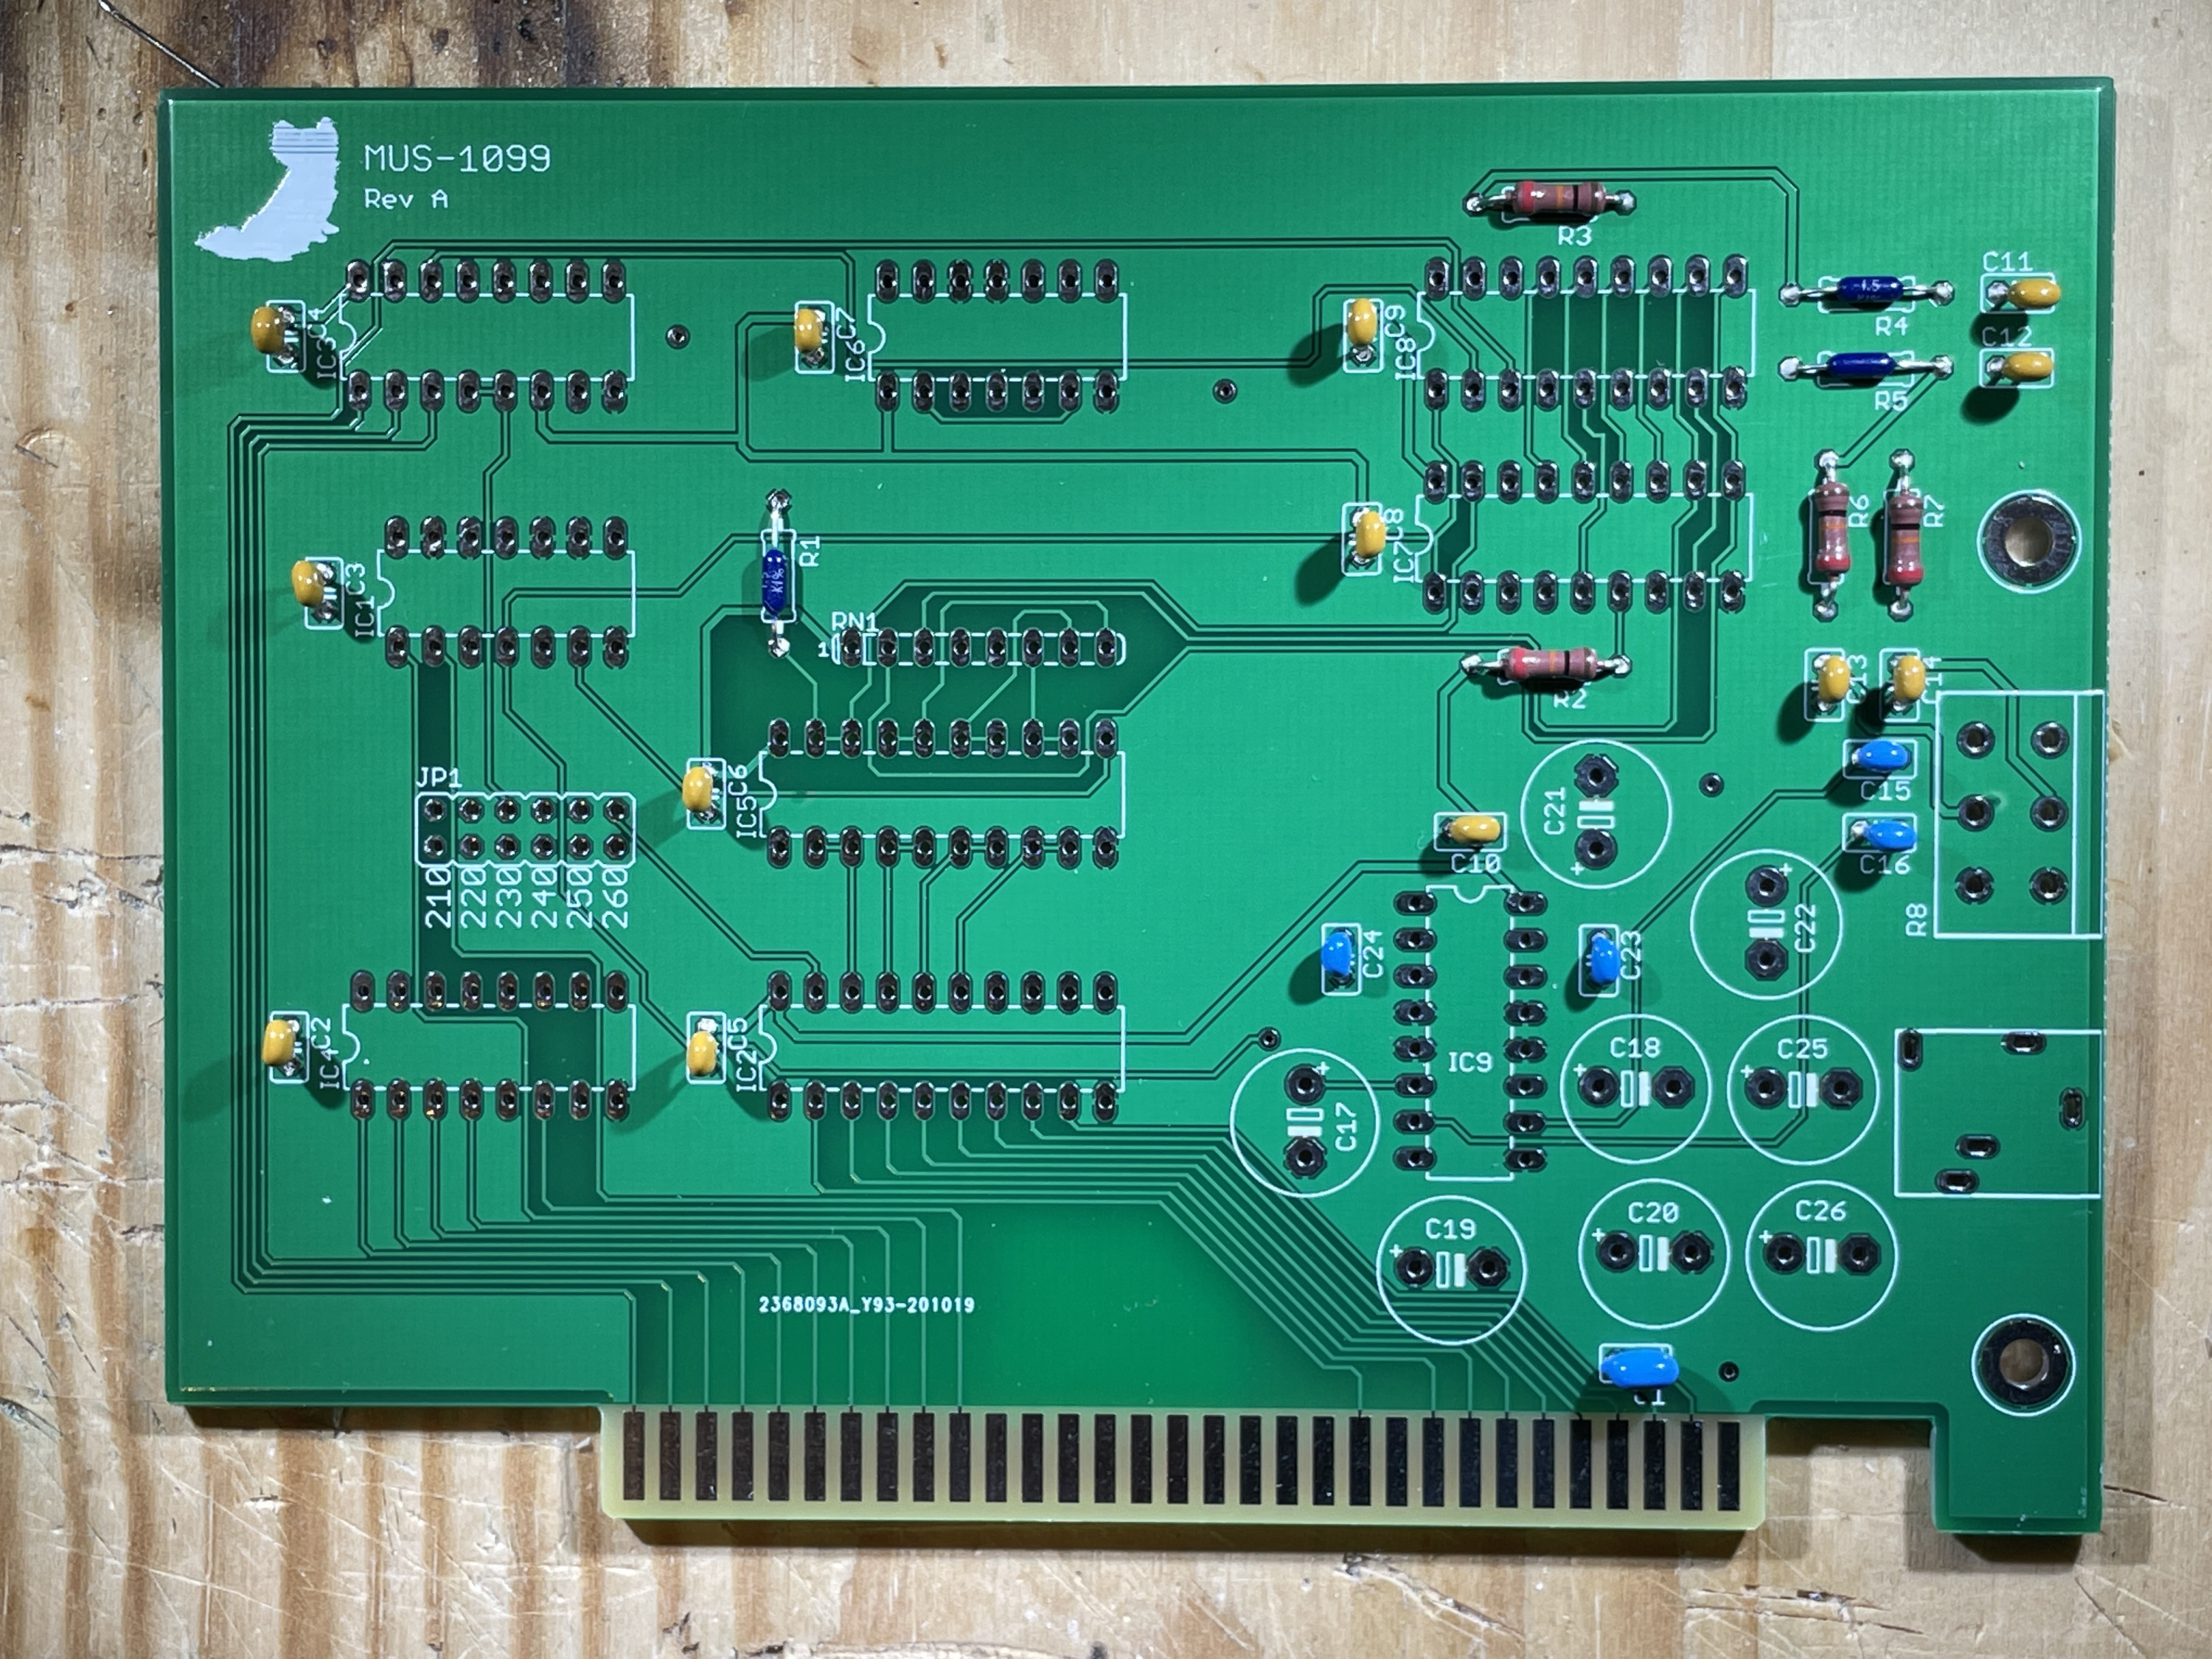 MUS-1099 PCB with capacitors added